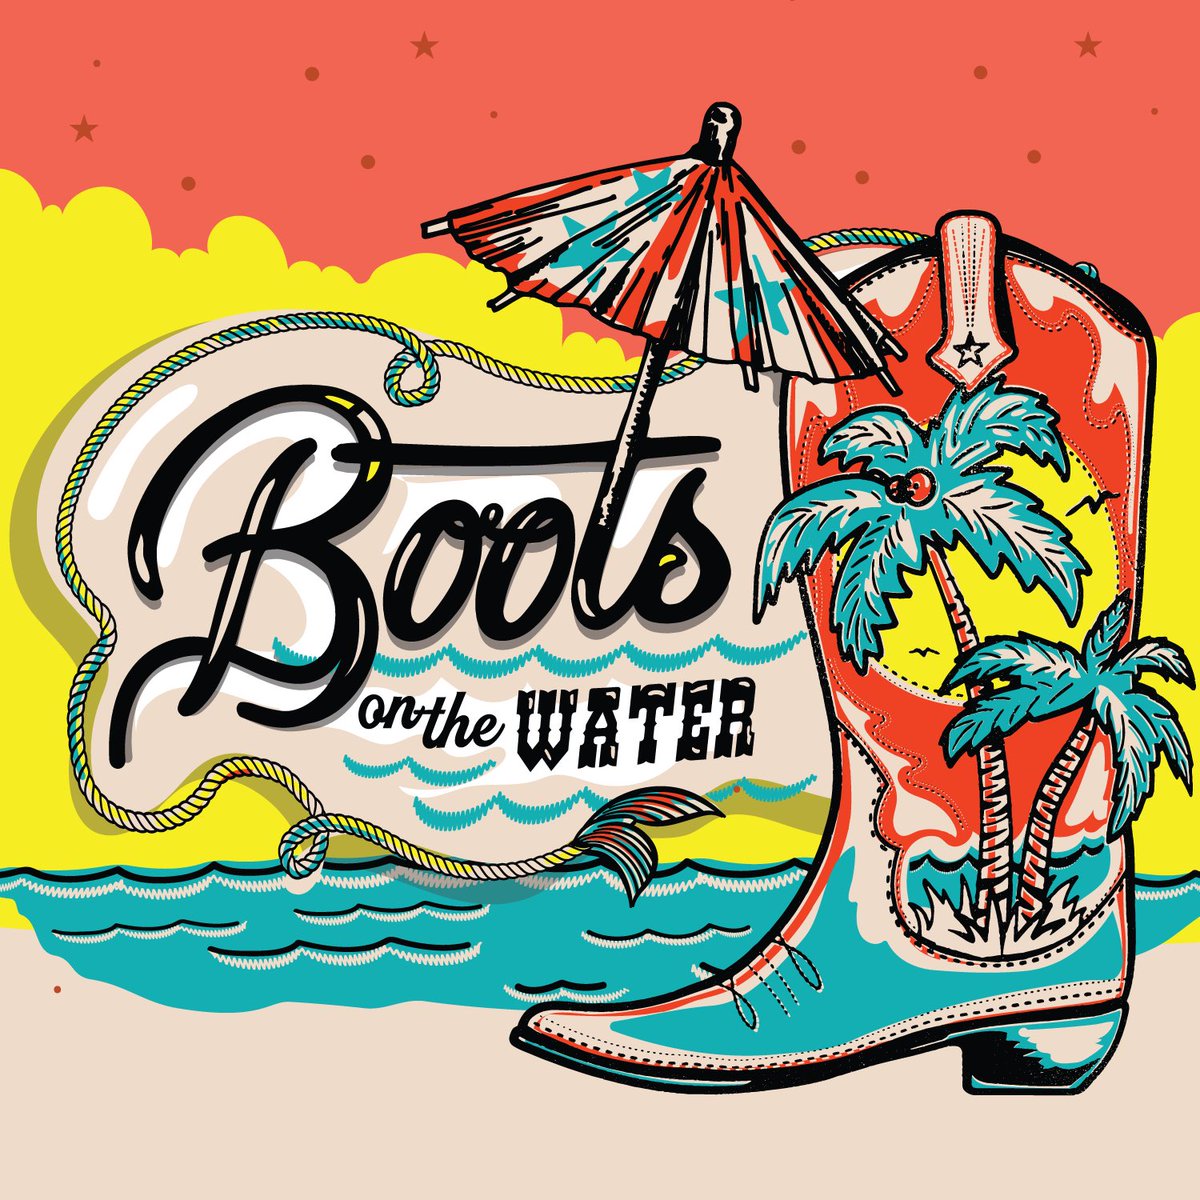 Something BIG is brewing on the horizon and we want you to join us on this experience. Head over to bootsonthewater.tbits.me and sign up to be the FIRST to know what we’re up to! @bootsonthewater